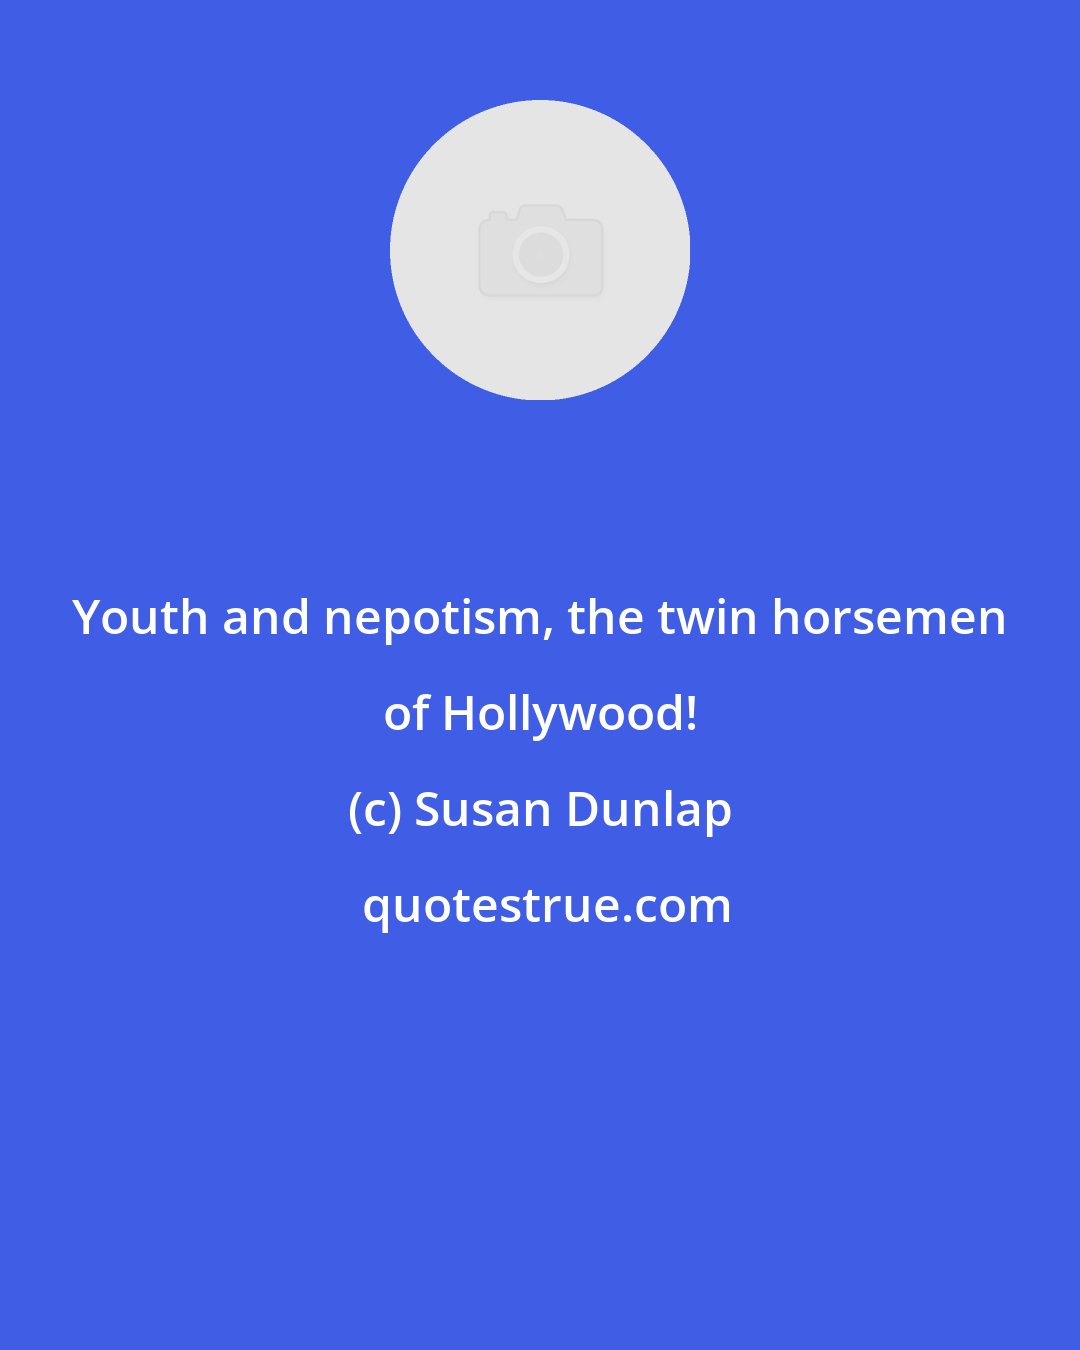 Susan Dunlap: Youth and nepotism, the twin horsemen of Hollywood!